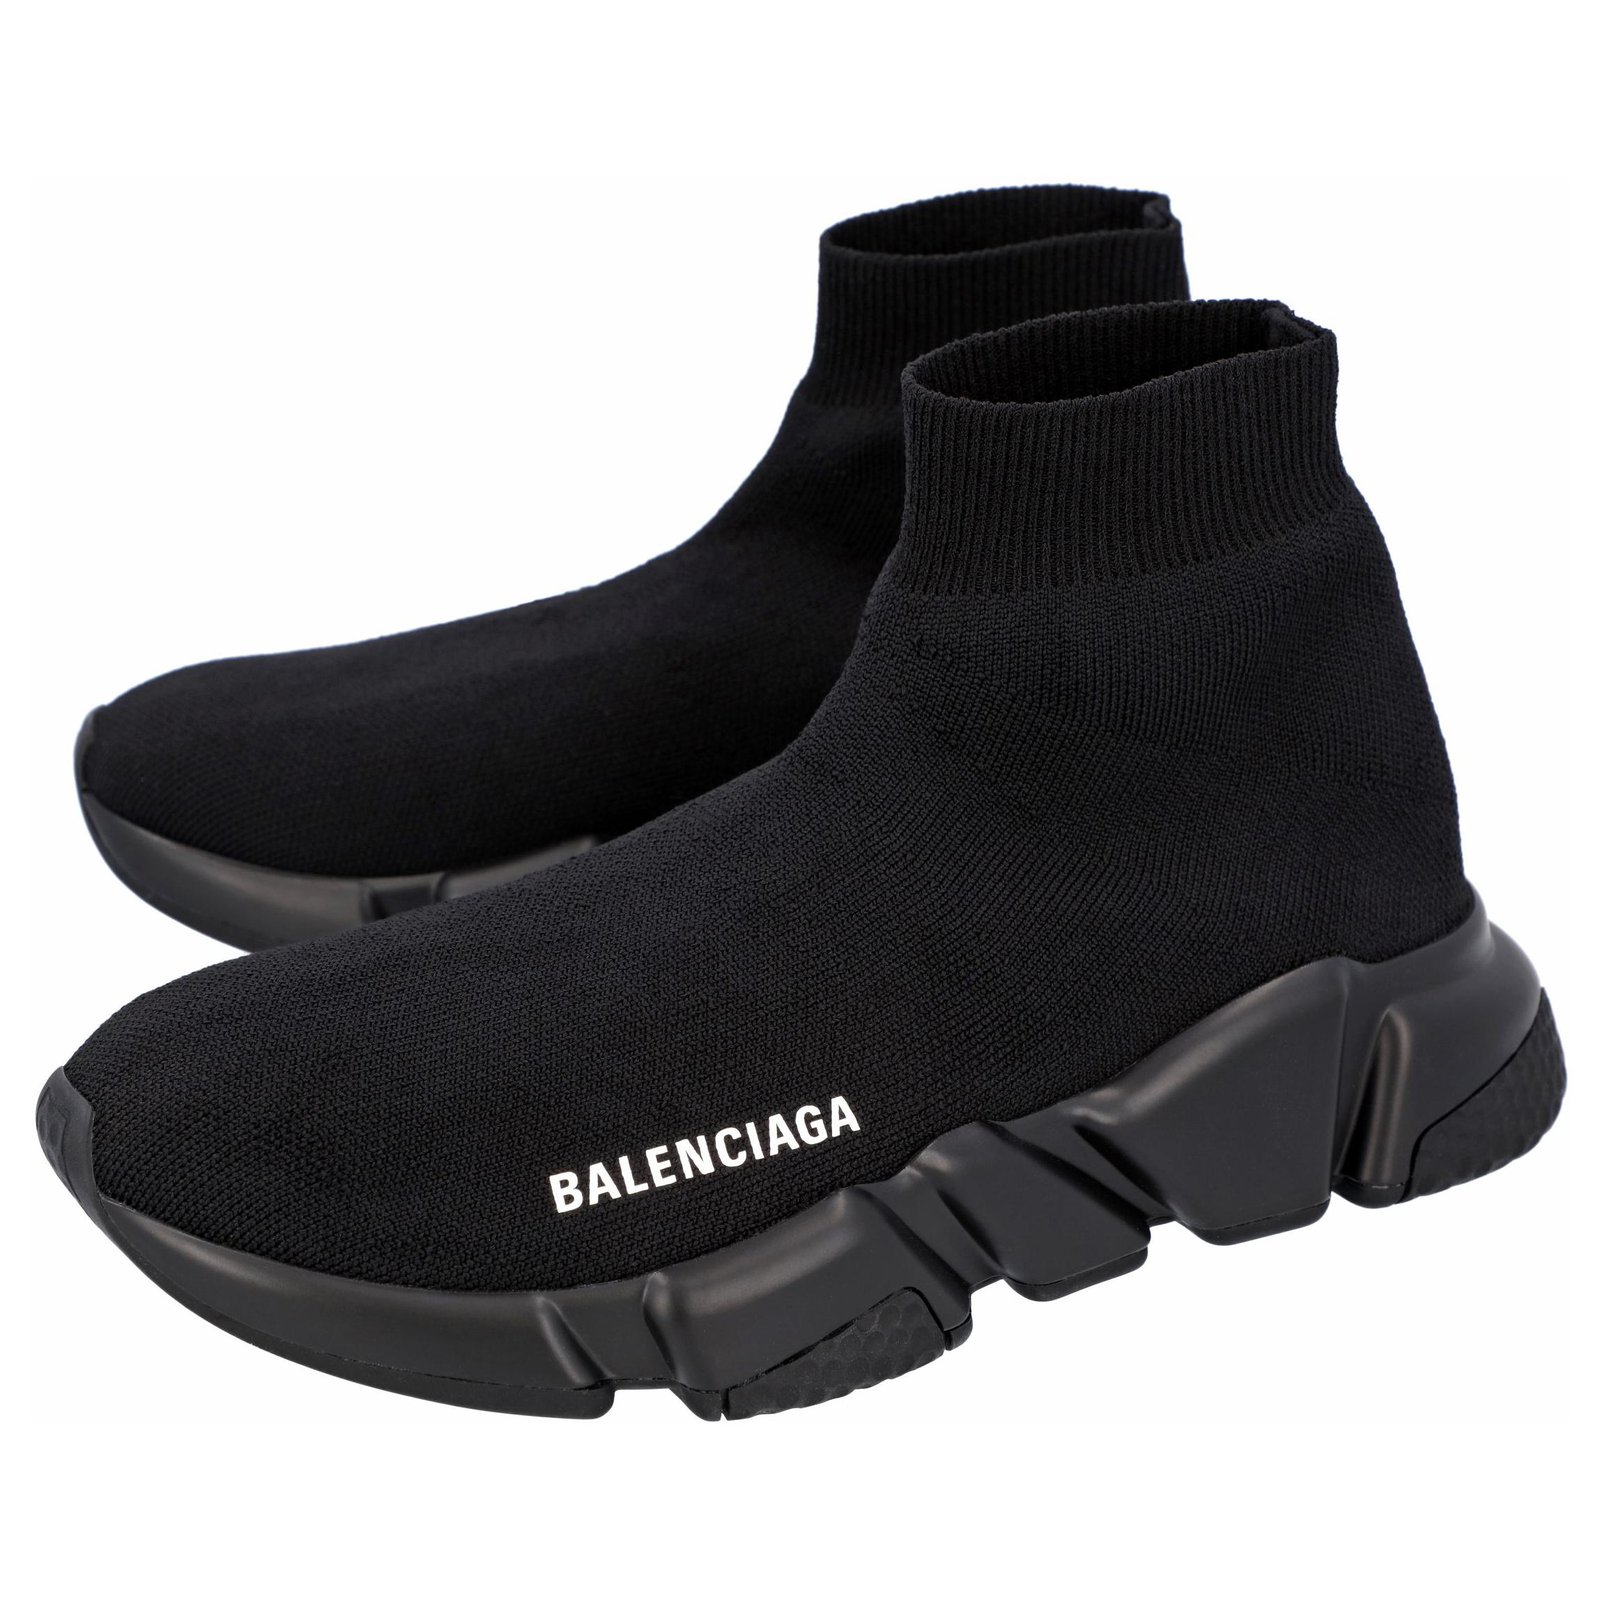 Balenciaga Speed 2.0 Sneaker in Beige Recycled Knit Polyester ref